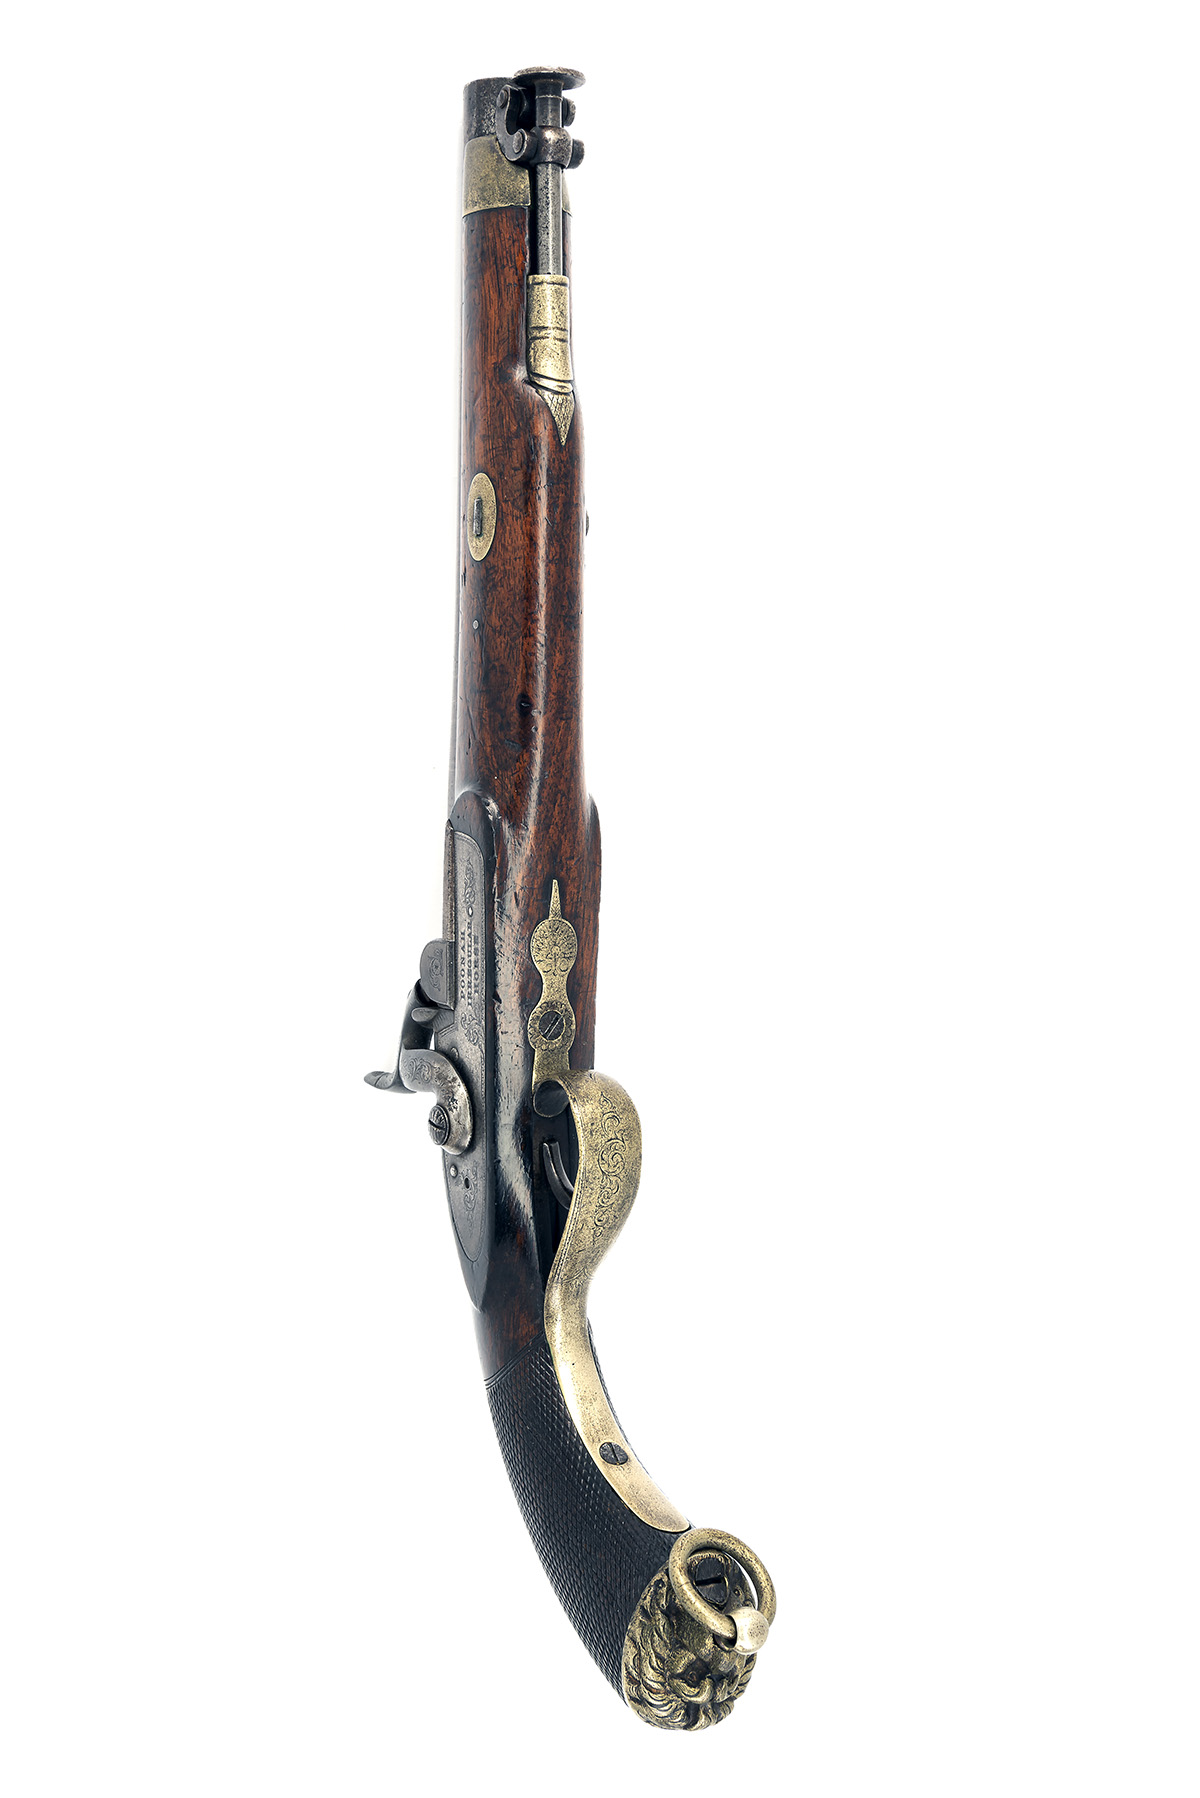 A RARE .65 NATIVE OFFICER'S PERCUSSION PISTOL OF THE POONAH IRREGULAR HORSE BY GARDEN & SON, CIRCA - Image 4 of 4